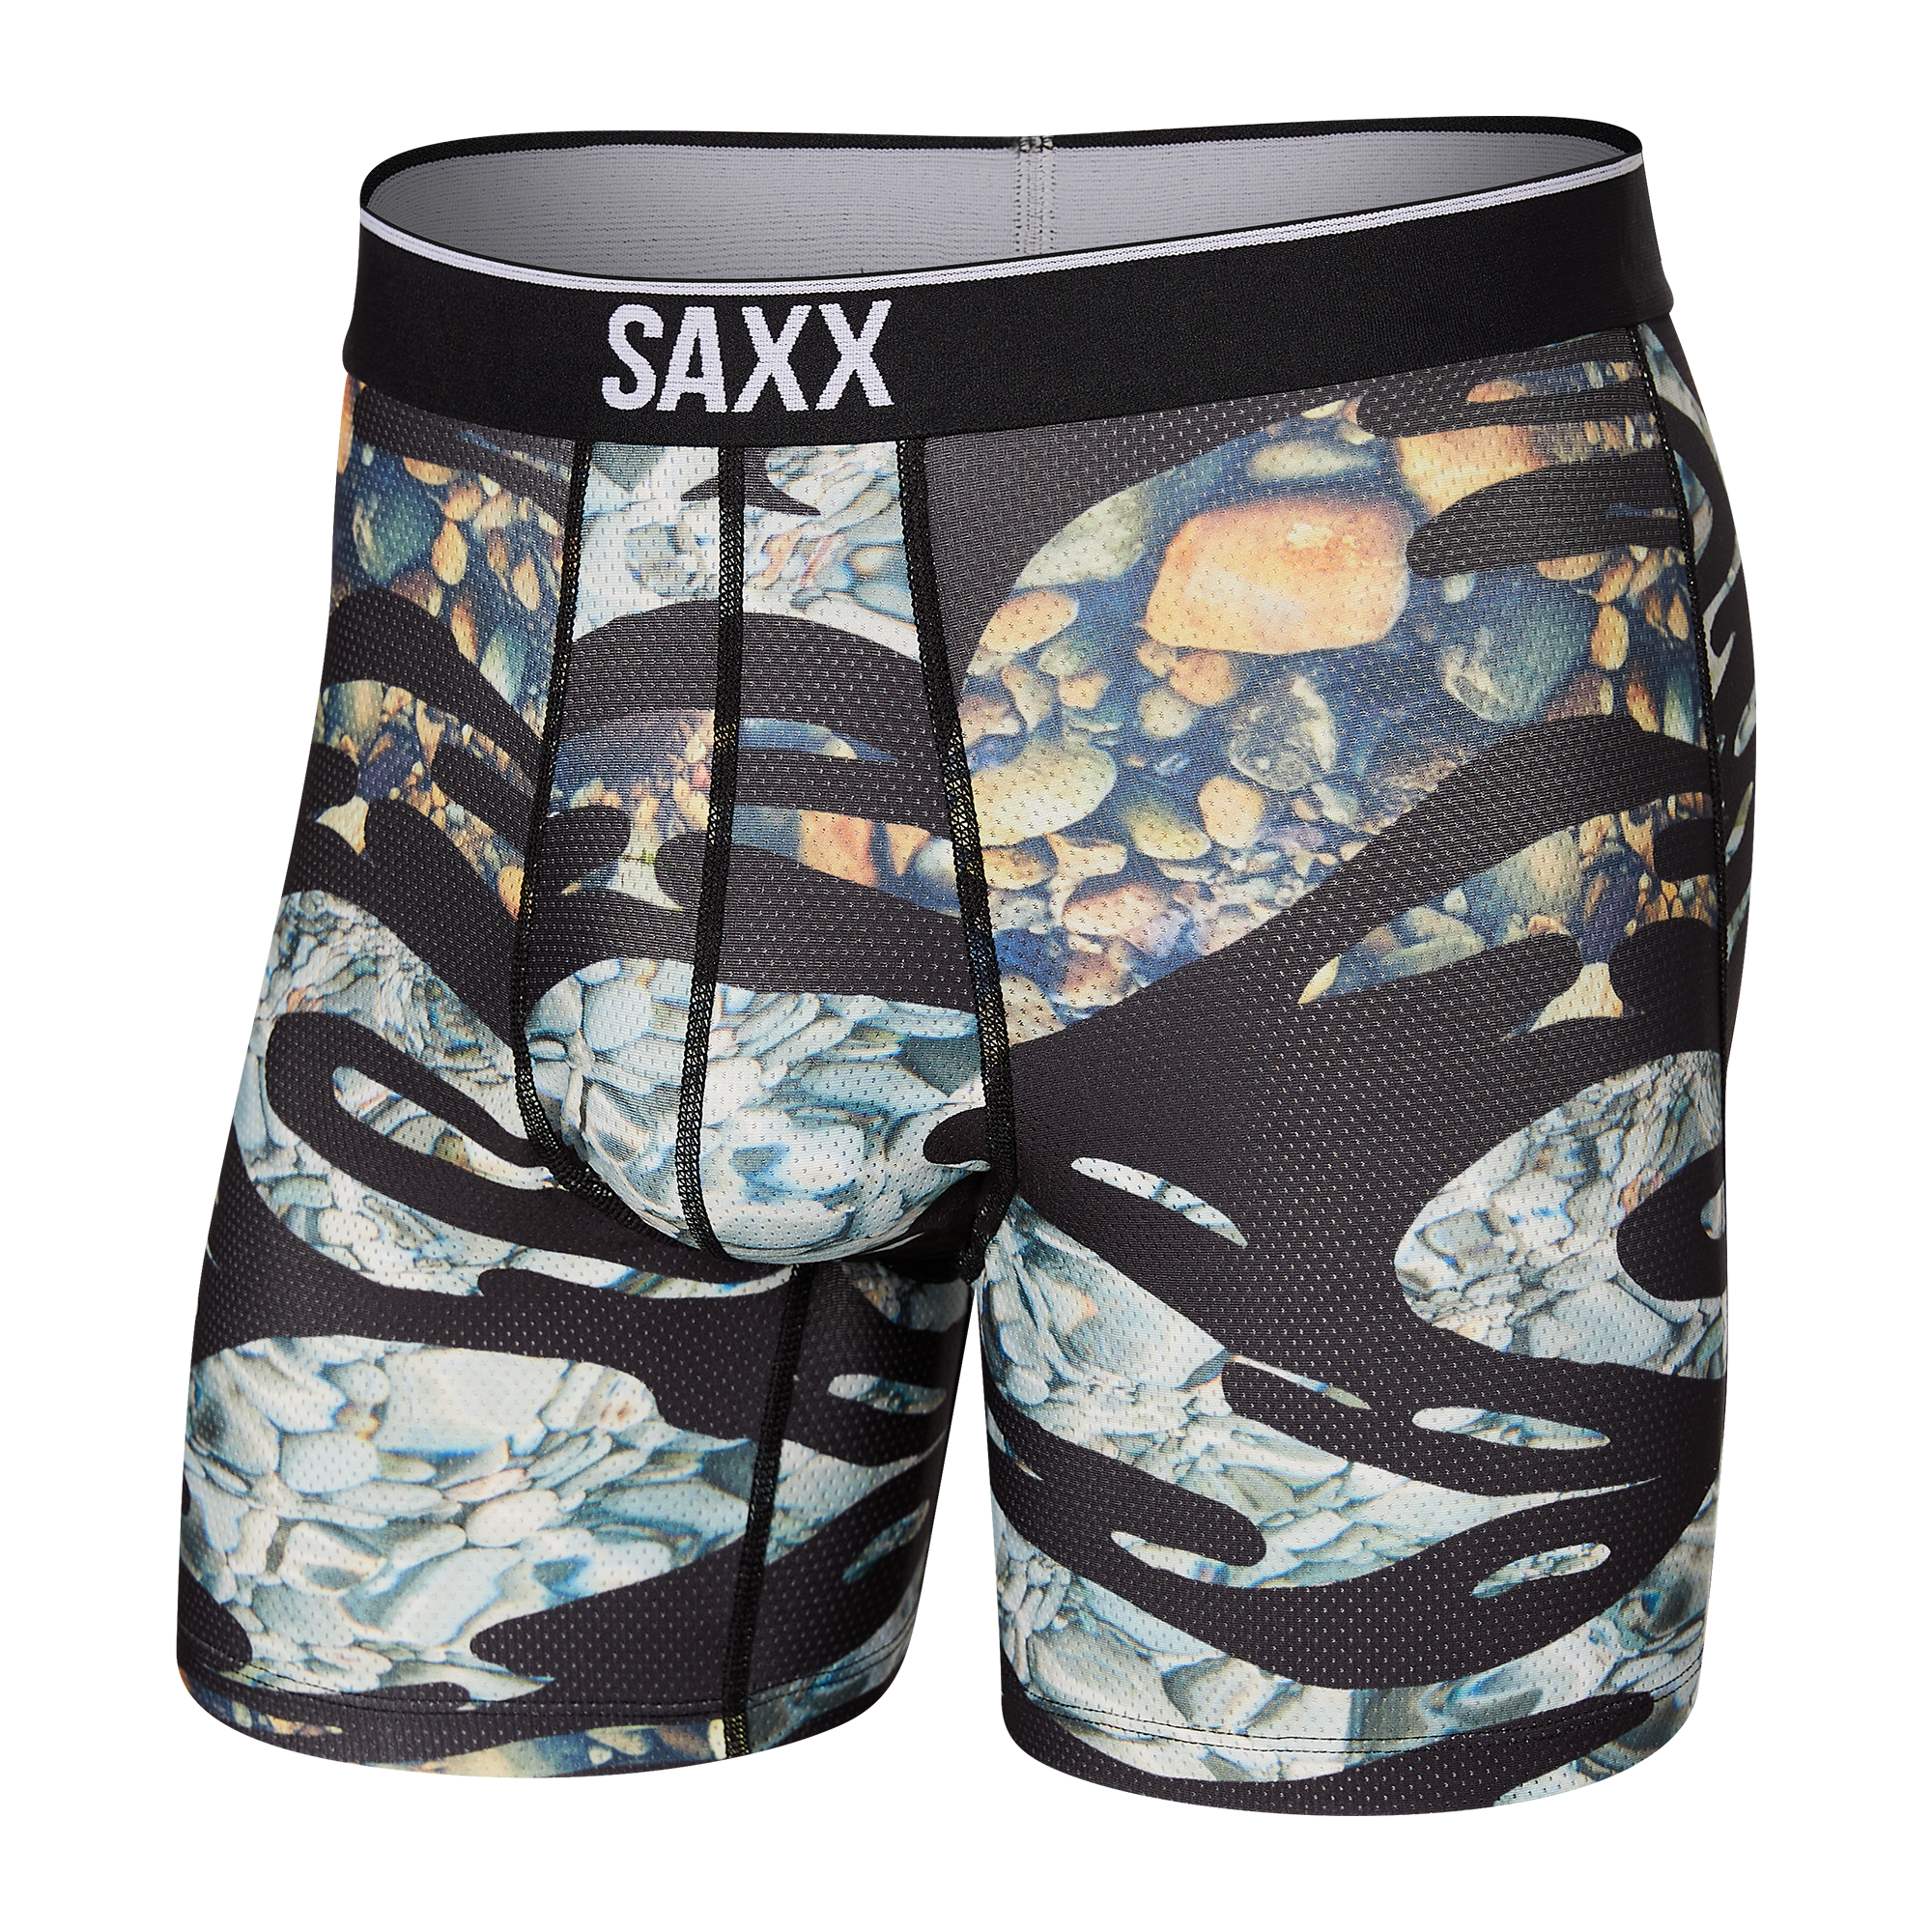 Deck the balls with life-changing SAXX Underwear featuring the